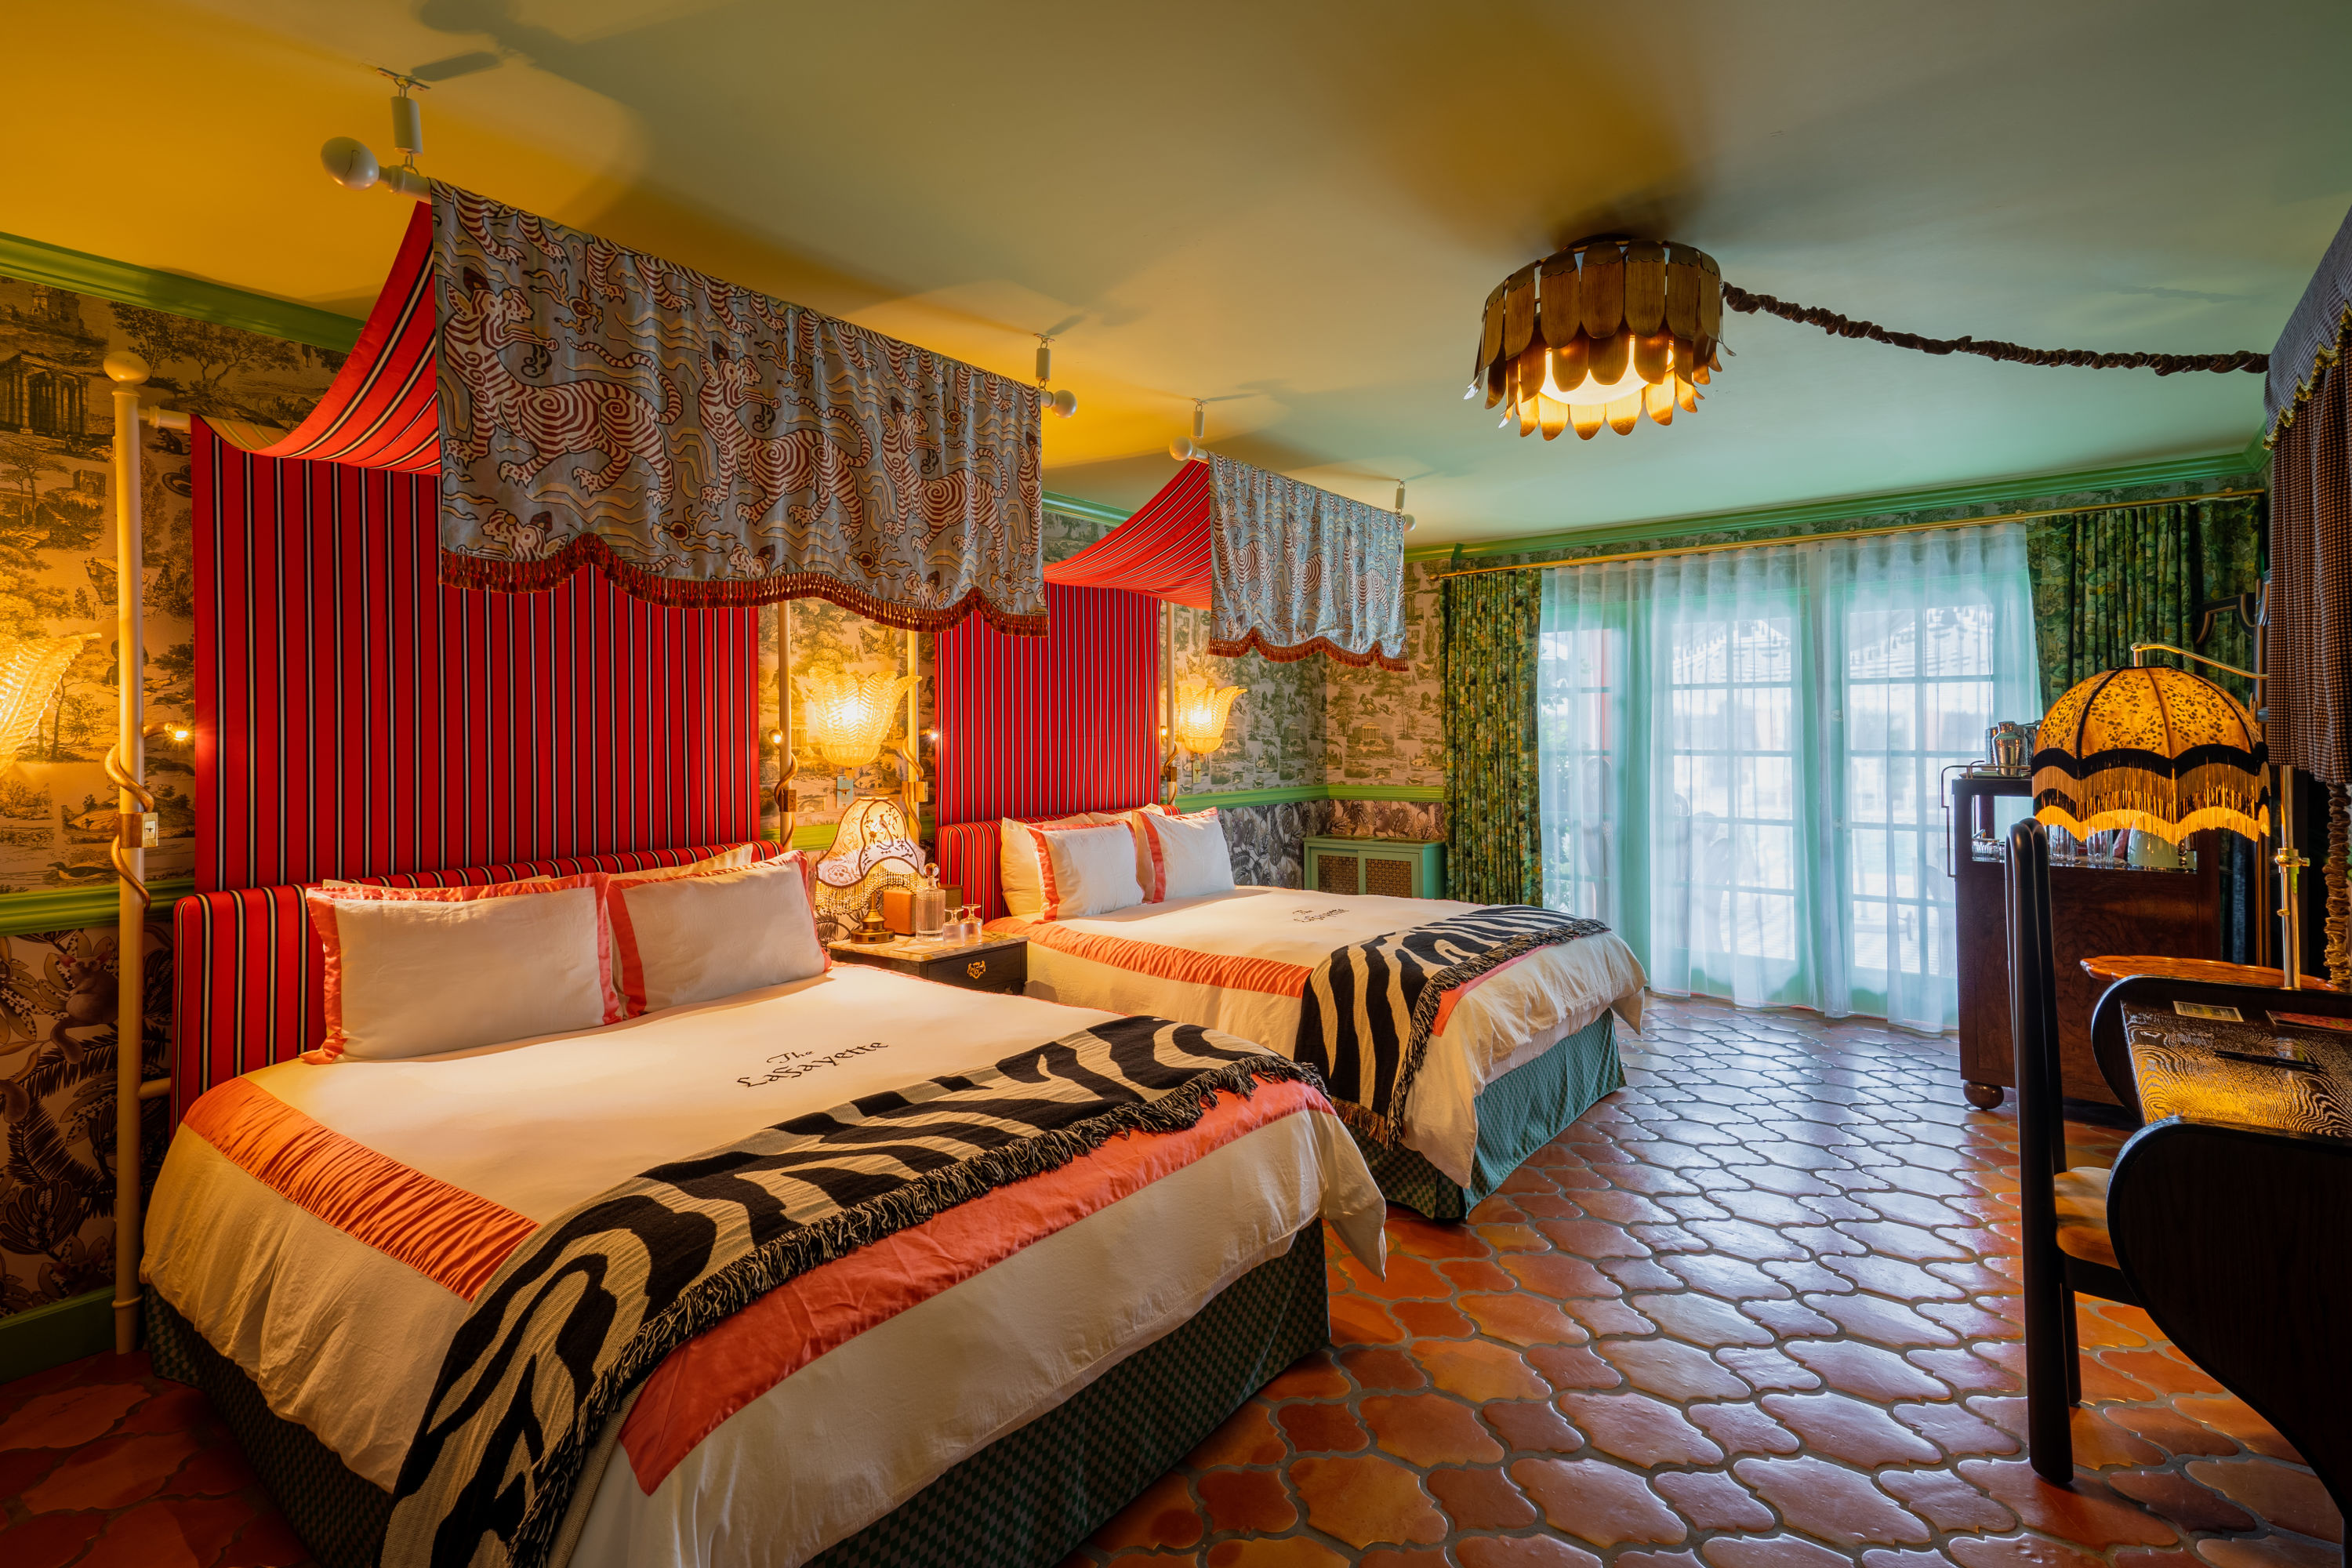 A room with two beds with dragon drapery and a red tiled floor